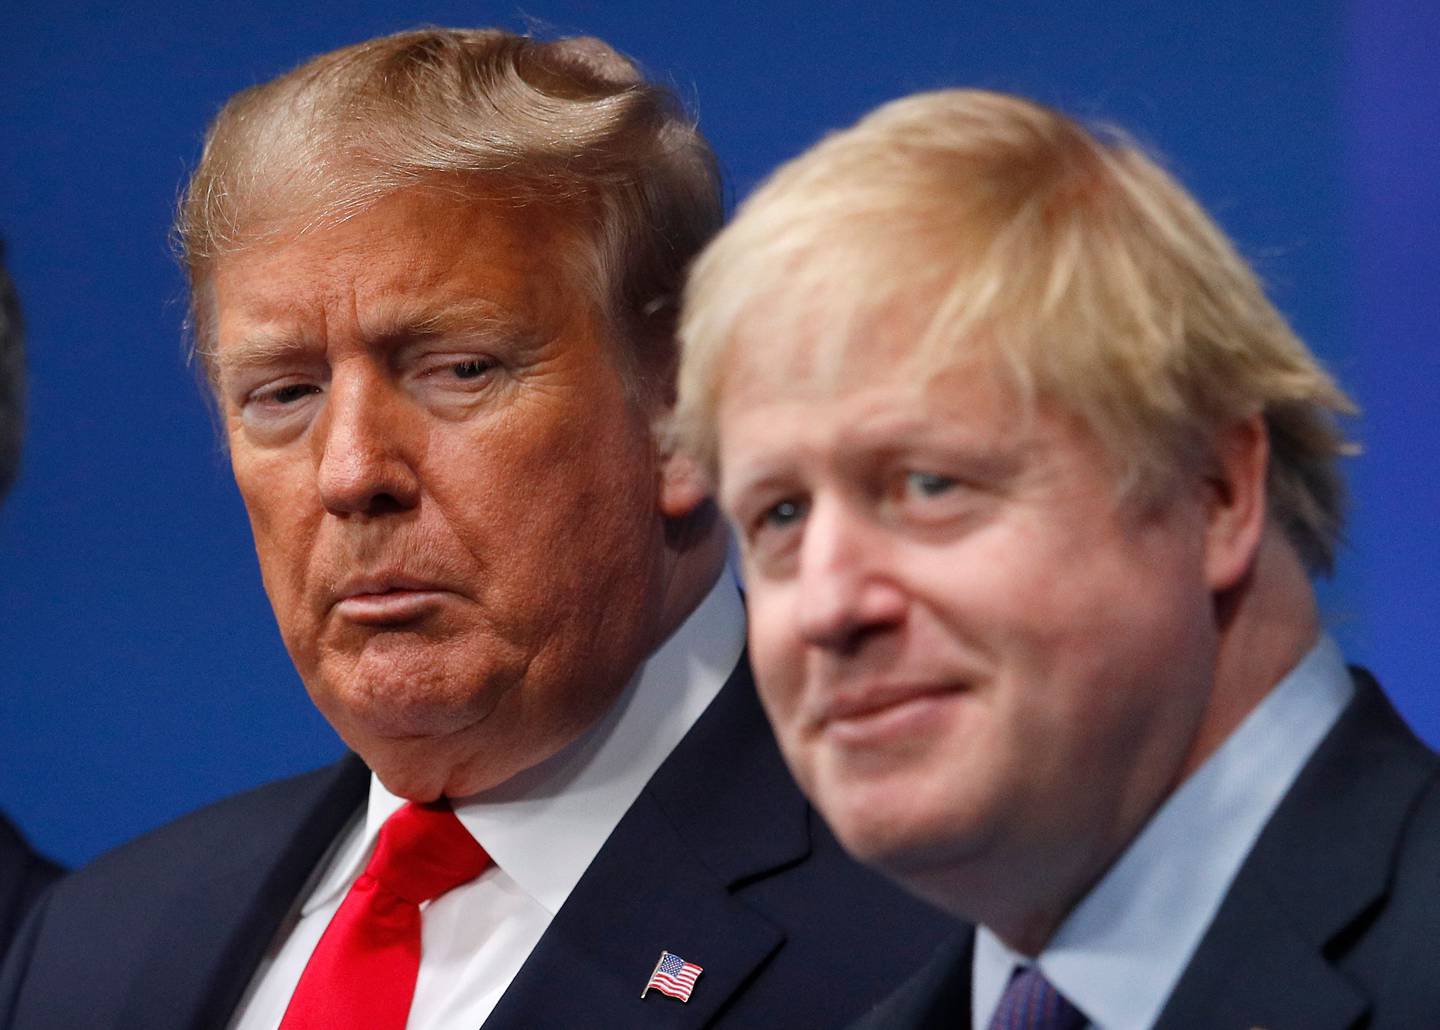 (FILES) In this file photo taken on December 04, 2019 Britain's Prime Minister Boris Johnson (R) welcomes US President Donald Trump (L) to the NATO summit at the Grove hotel in Watford, northeast of London. - Boris Johnson rode his luck throughout his career, bouncing back from a succession of setbacks and scandals that would have sunk other less popular politicians. But the luck of a man once likened to a "greased piglet" for his ability to escape controversies finally ran out, after a slew of high-profile resignations from his scandal-hit government. (Photo by PETER NICHOLLS / various sources / AFP)